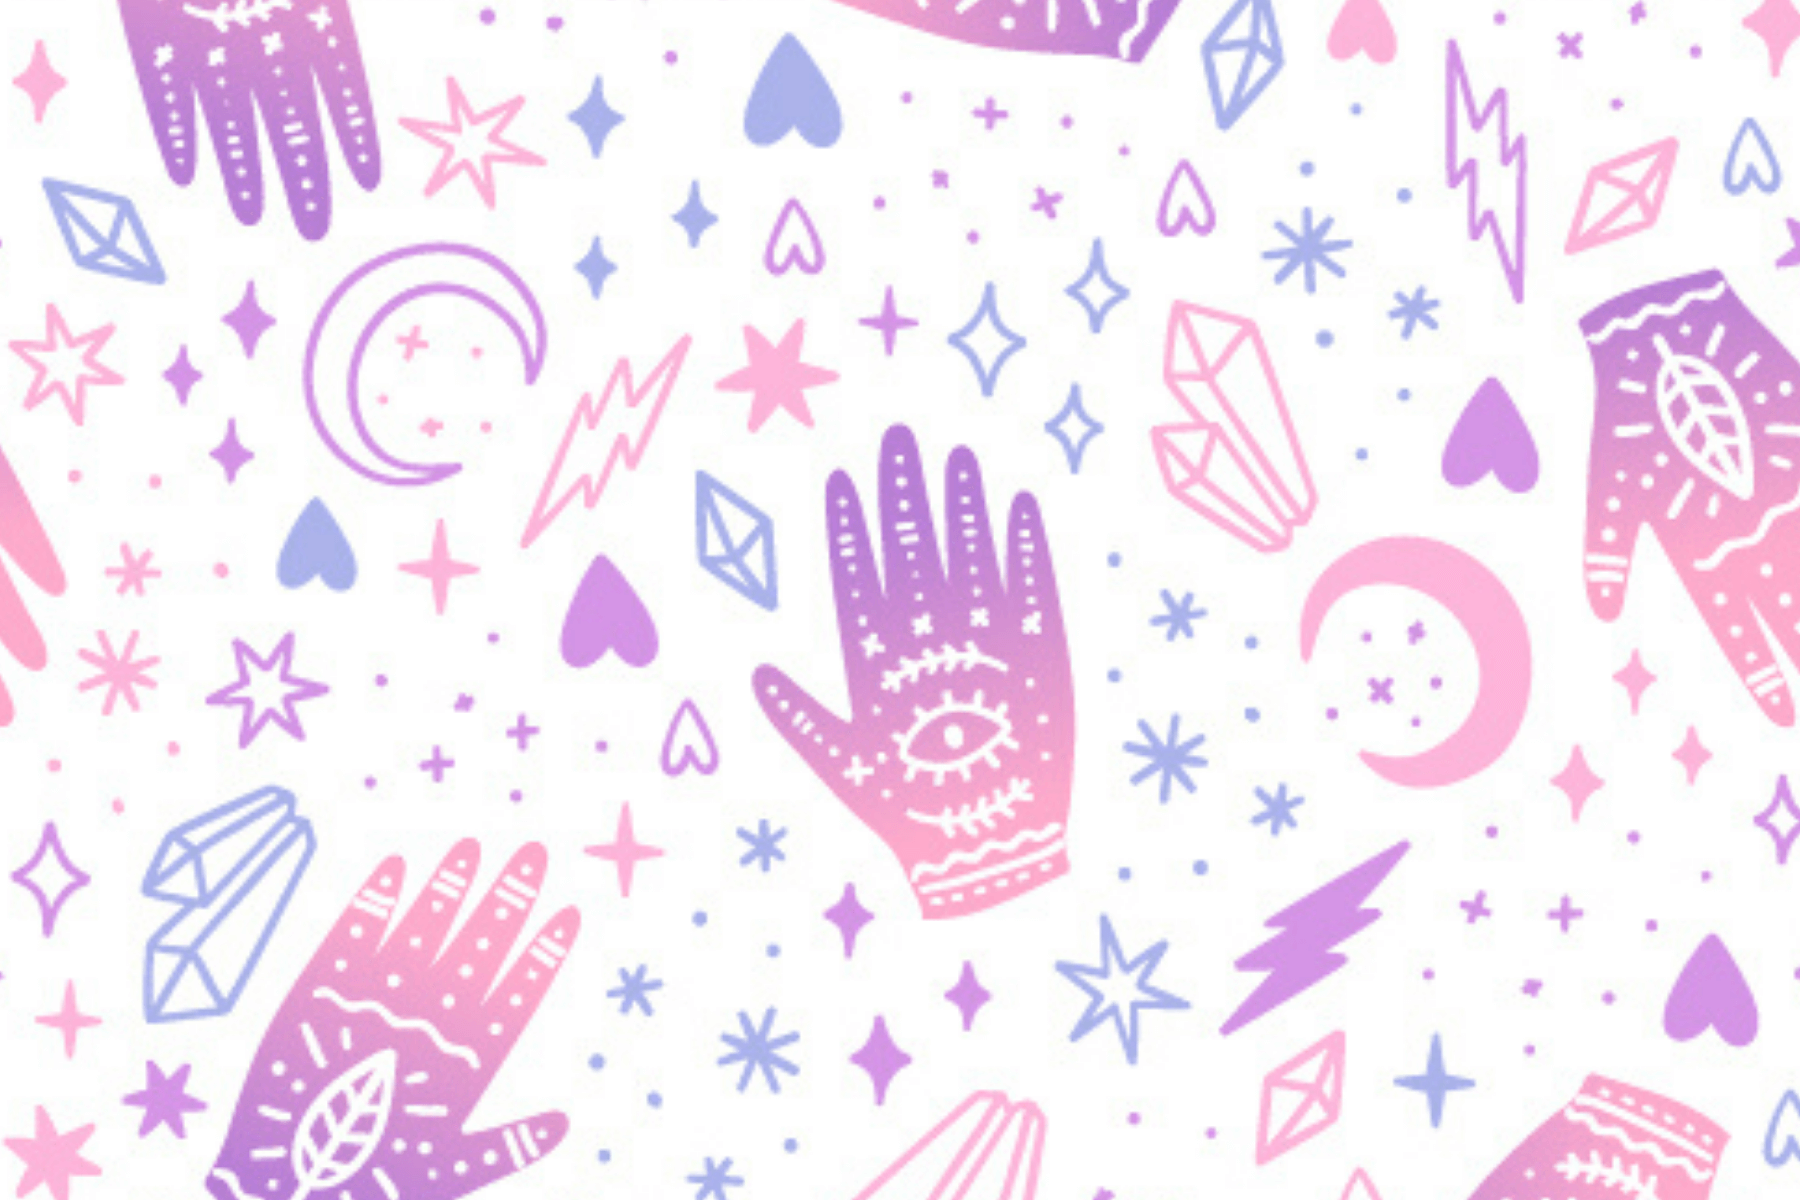 Five Magickal Phone Apps for the Modern Witch